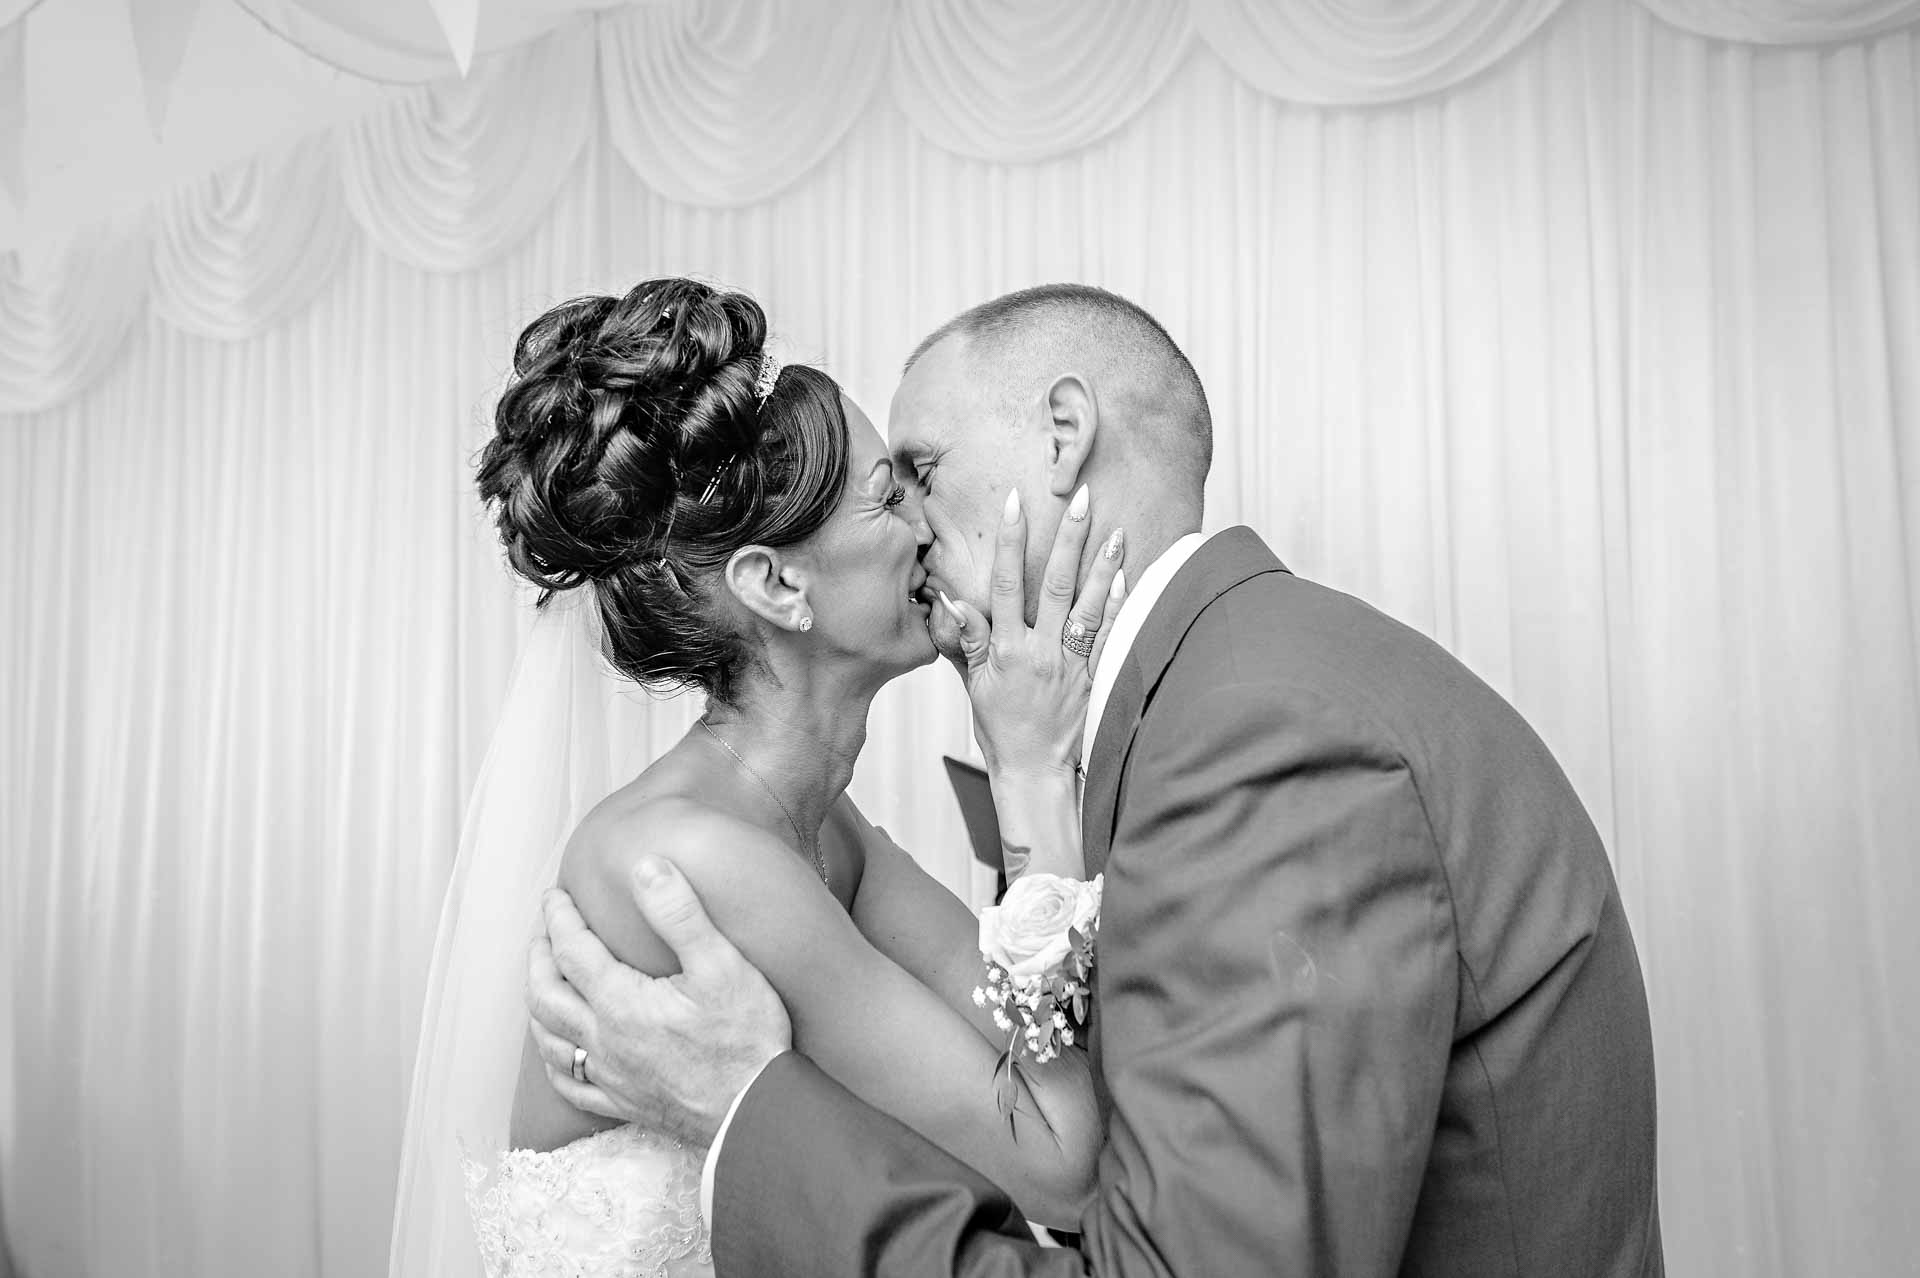 Newly-weds kiss at their wedding in Caerphilly, South Wales